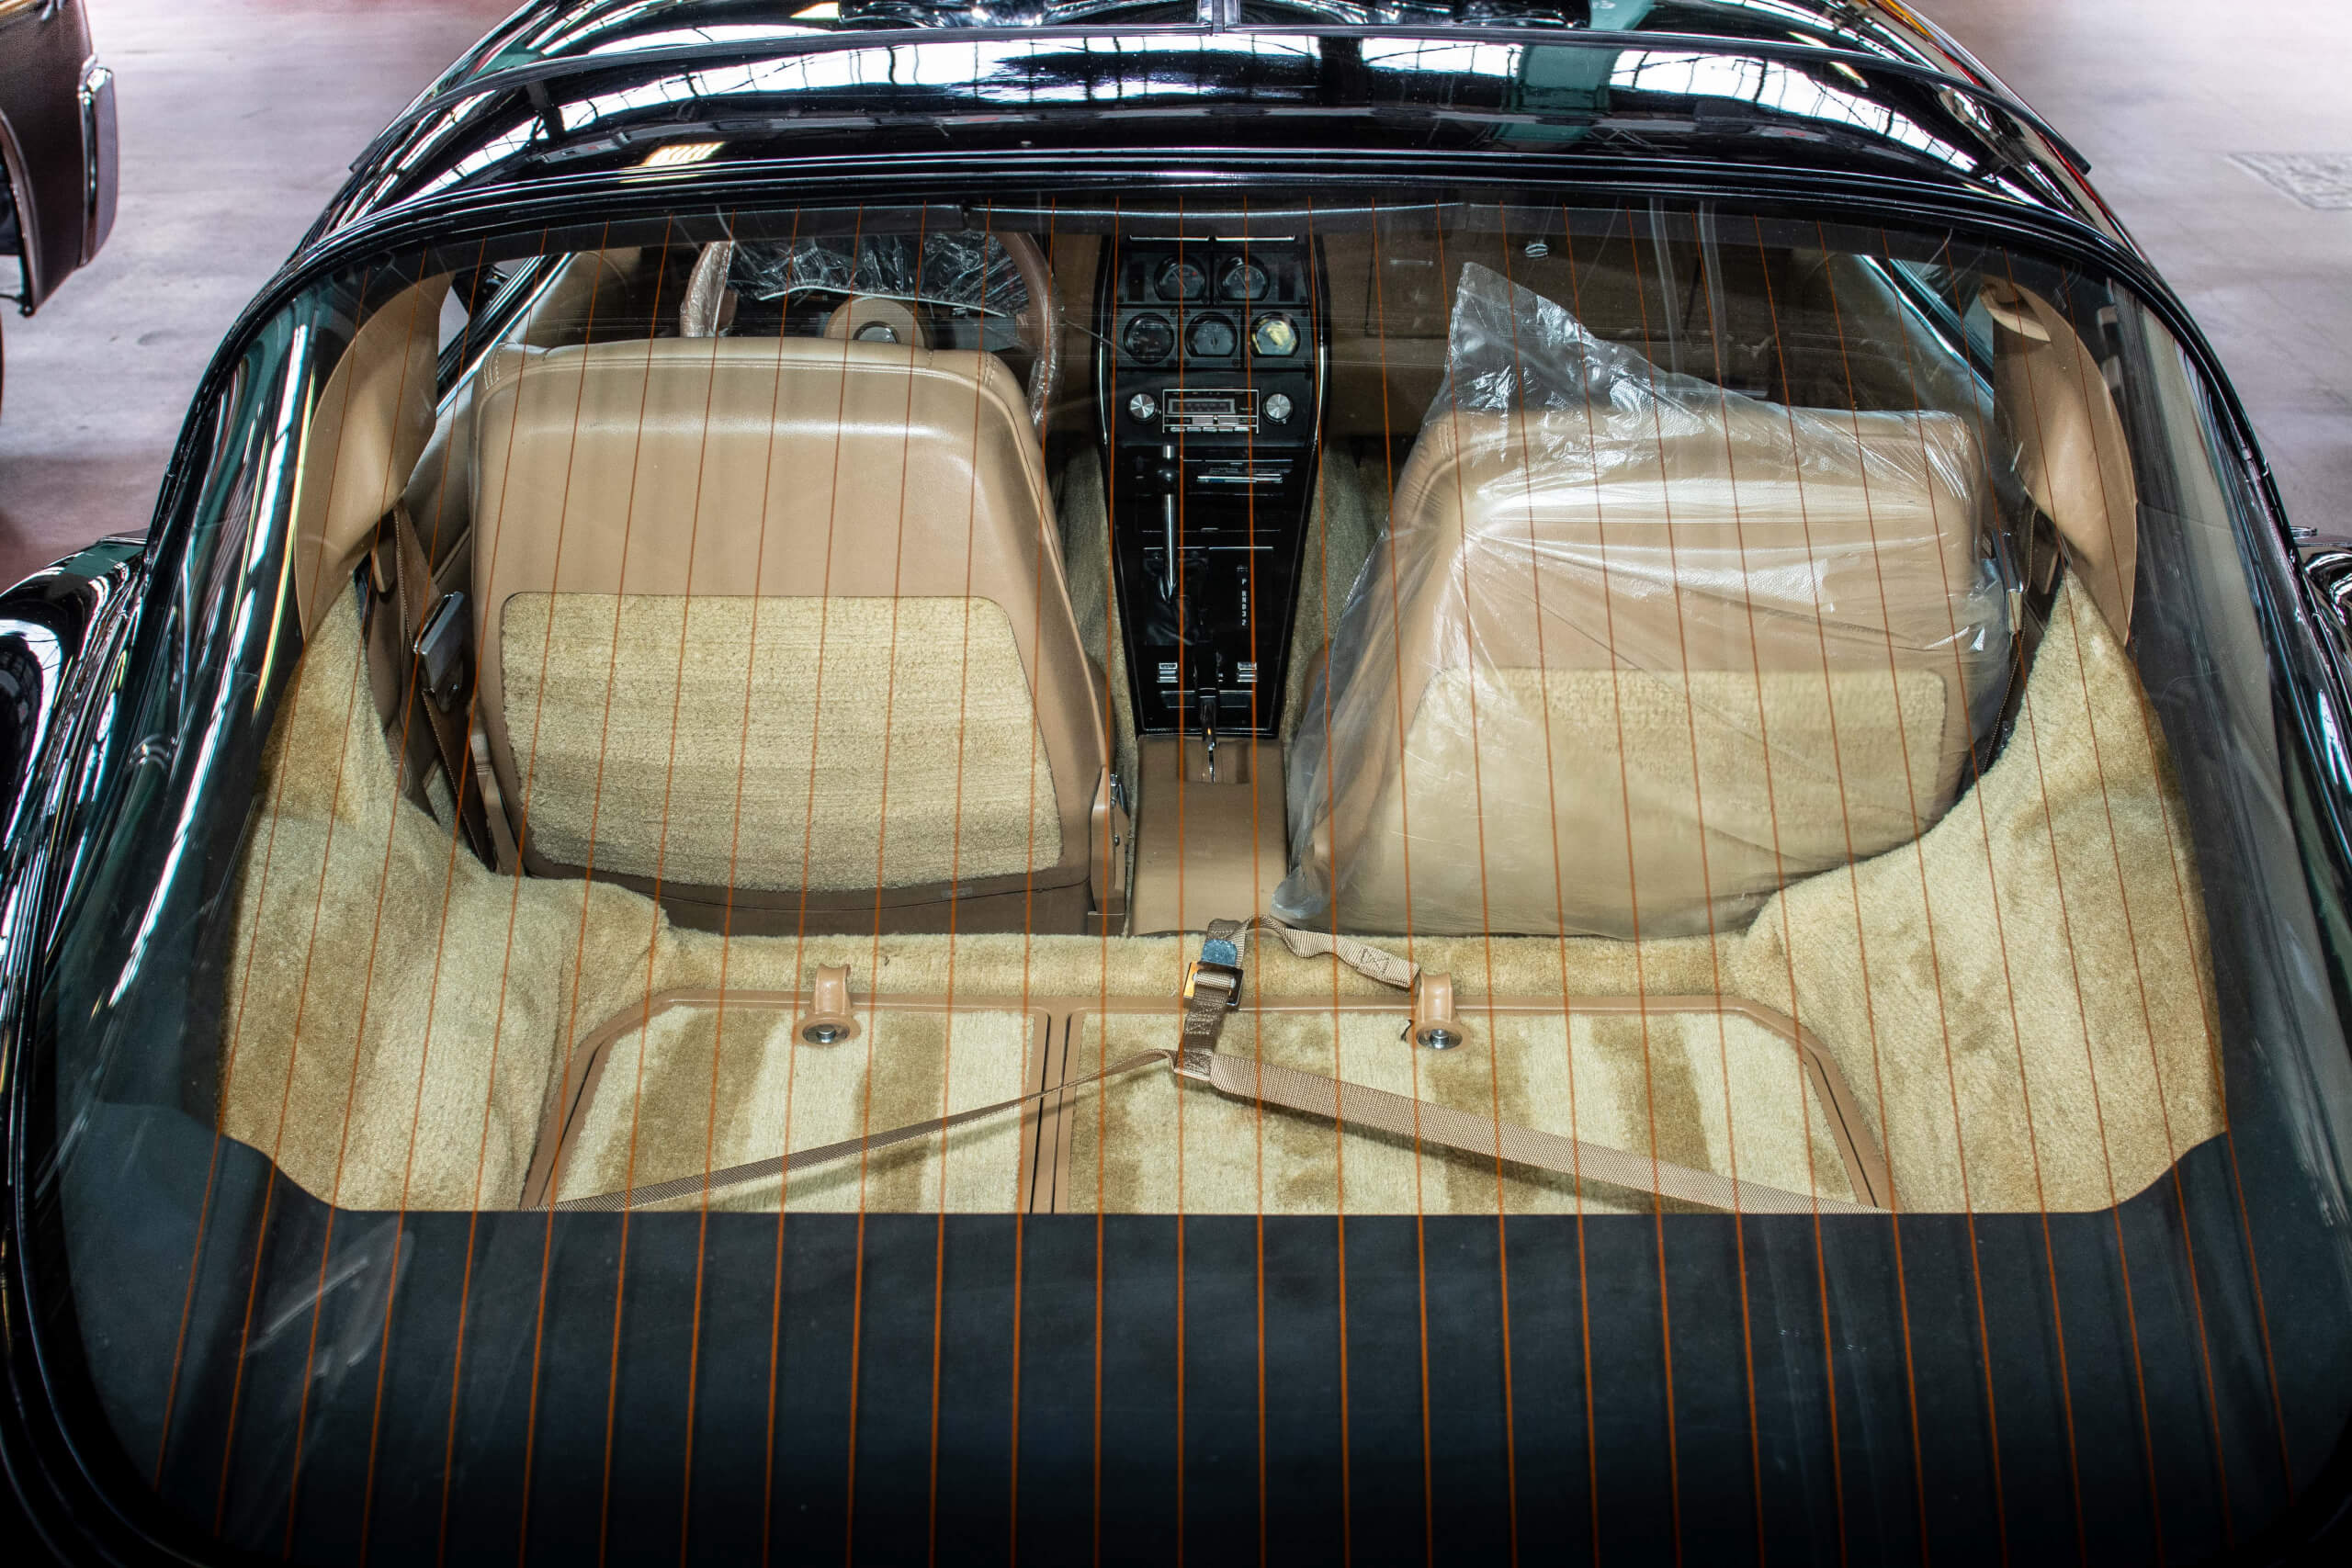 The C3 Corvette features two cargo areas behind the front seats.